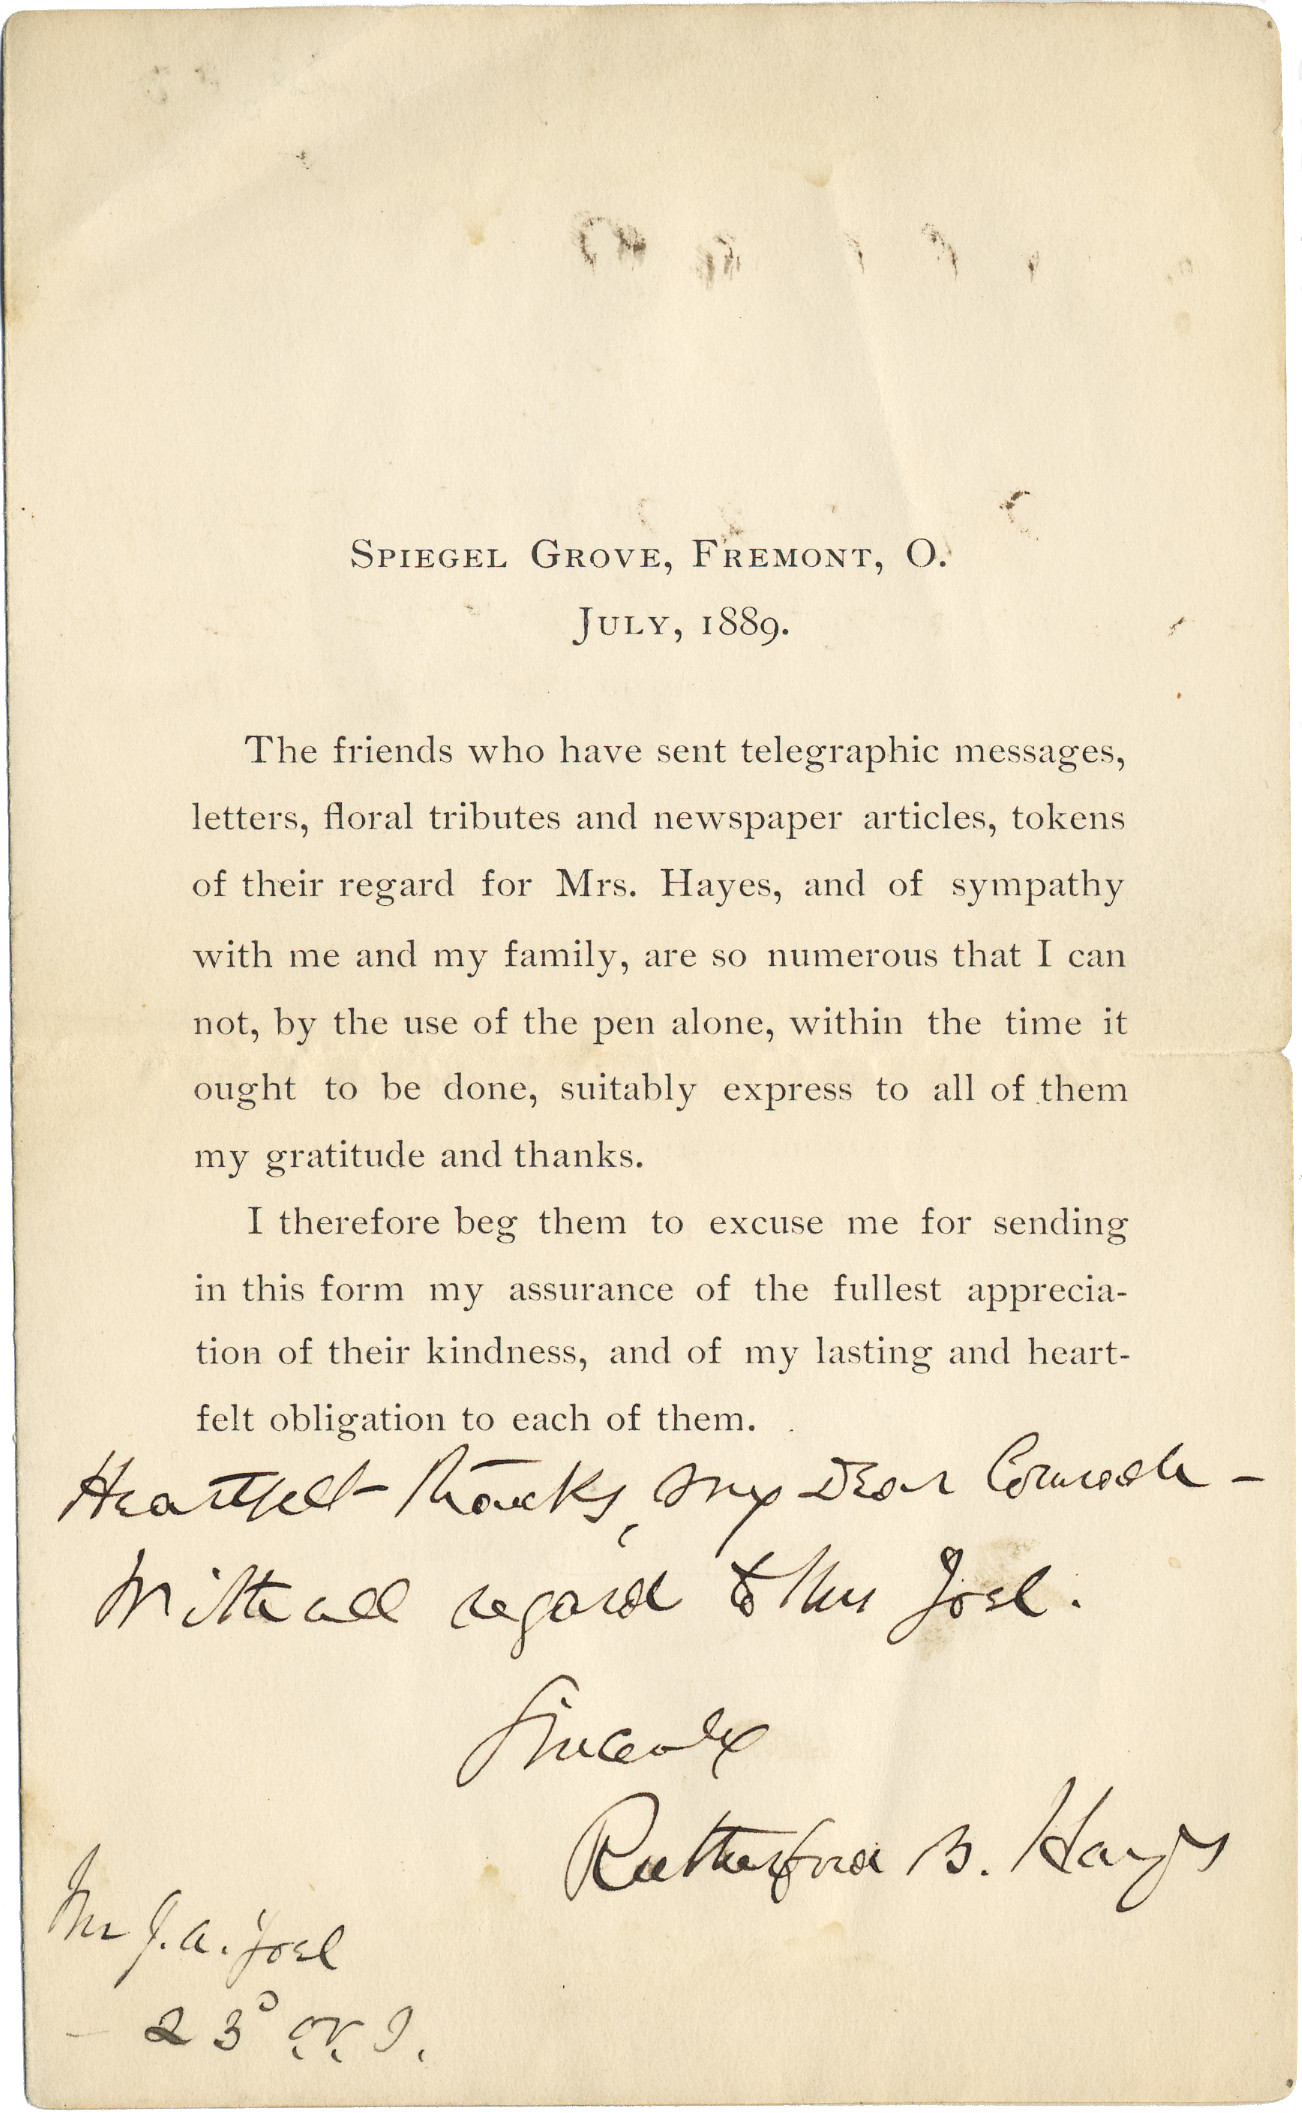 Former President Hayes Salutes a Jewish Civil War Soldier and Friend, J.A. Joel, as “Dear Comrade”